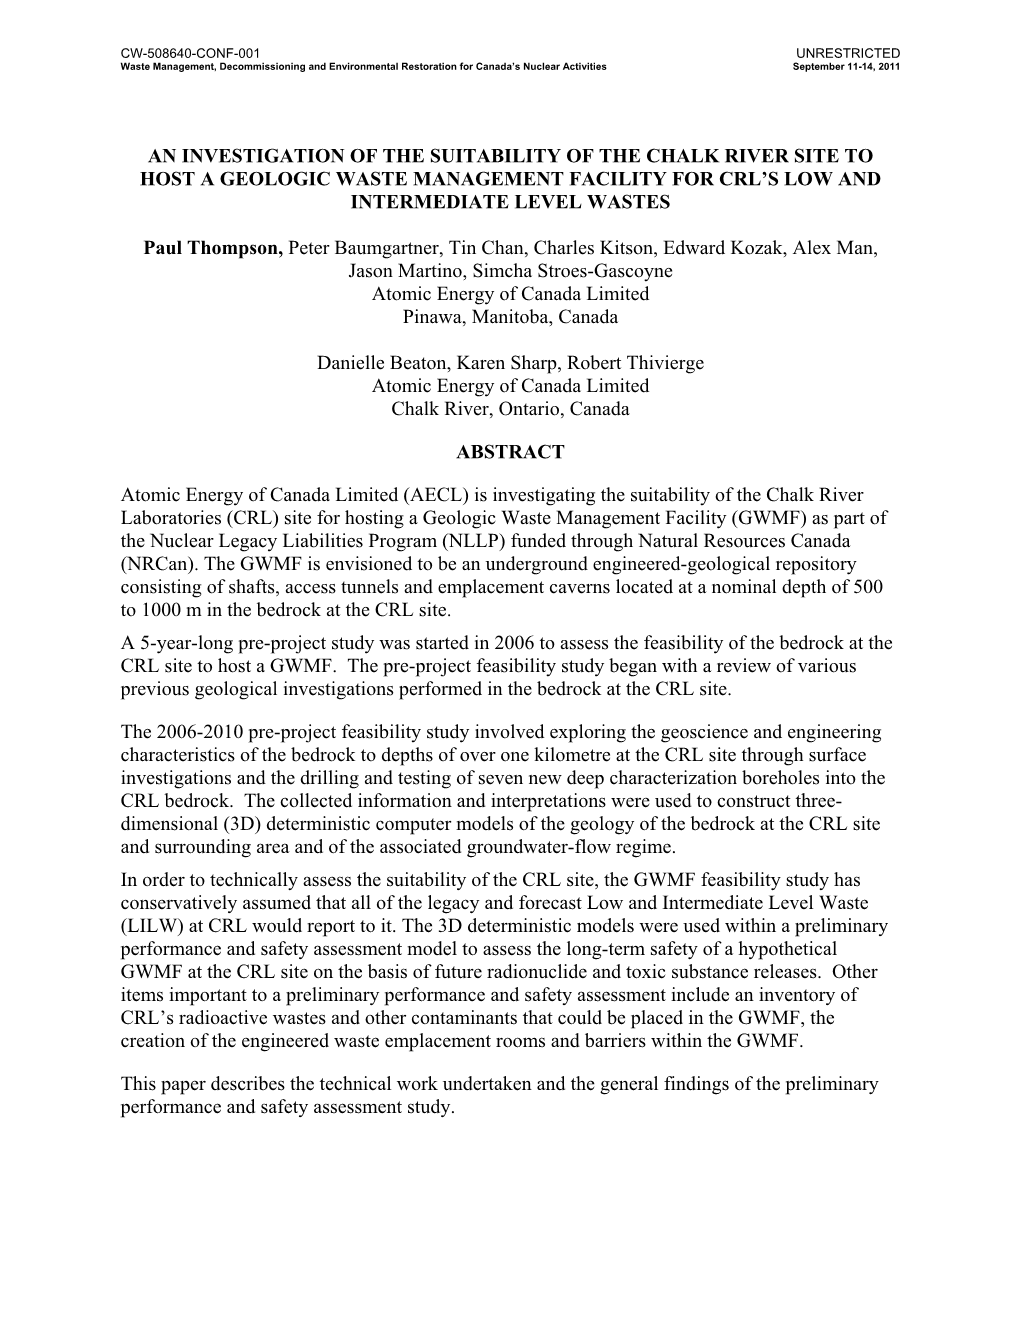 An Investigation of the Suitability of the Chalk River Site to Host a Geologic Waste Management Facility for Crl's Low And